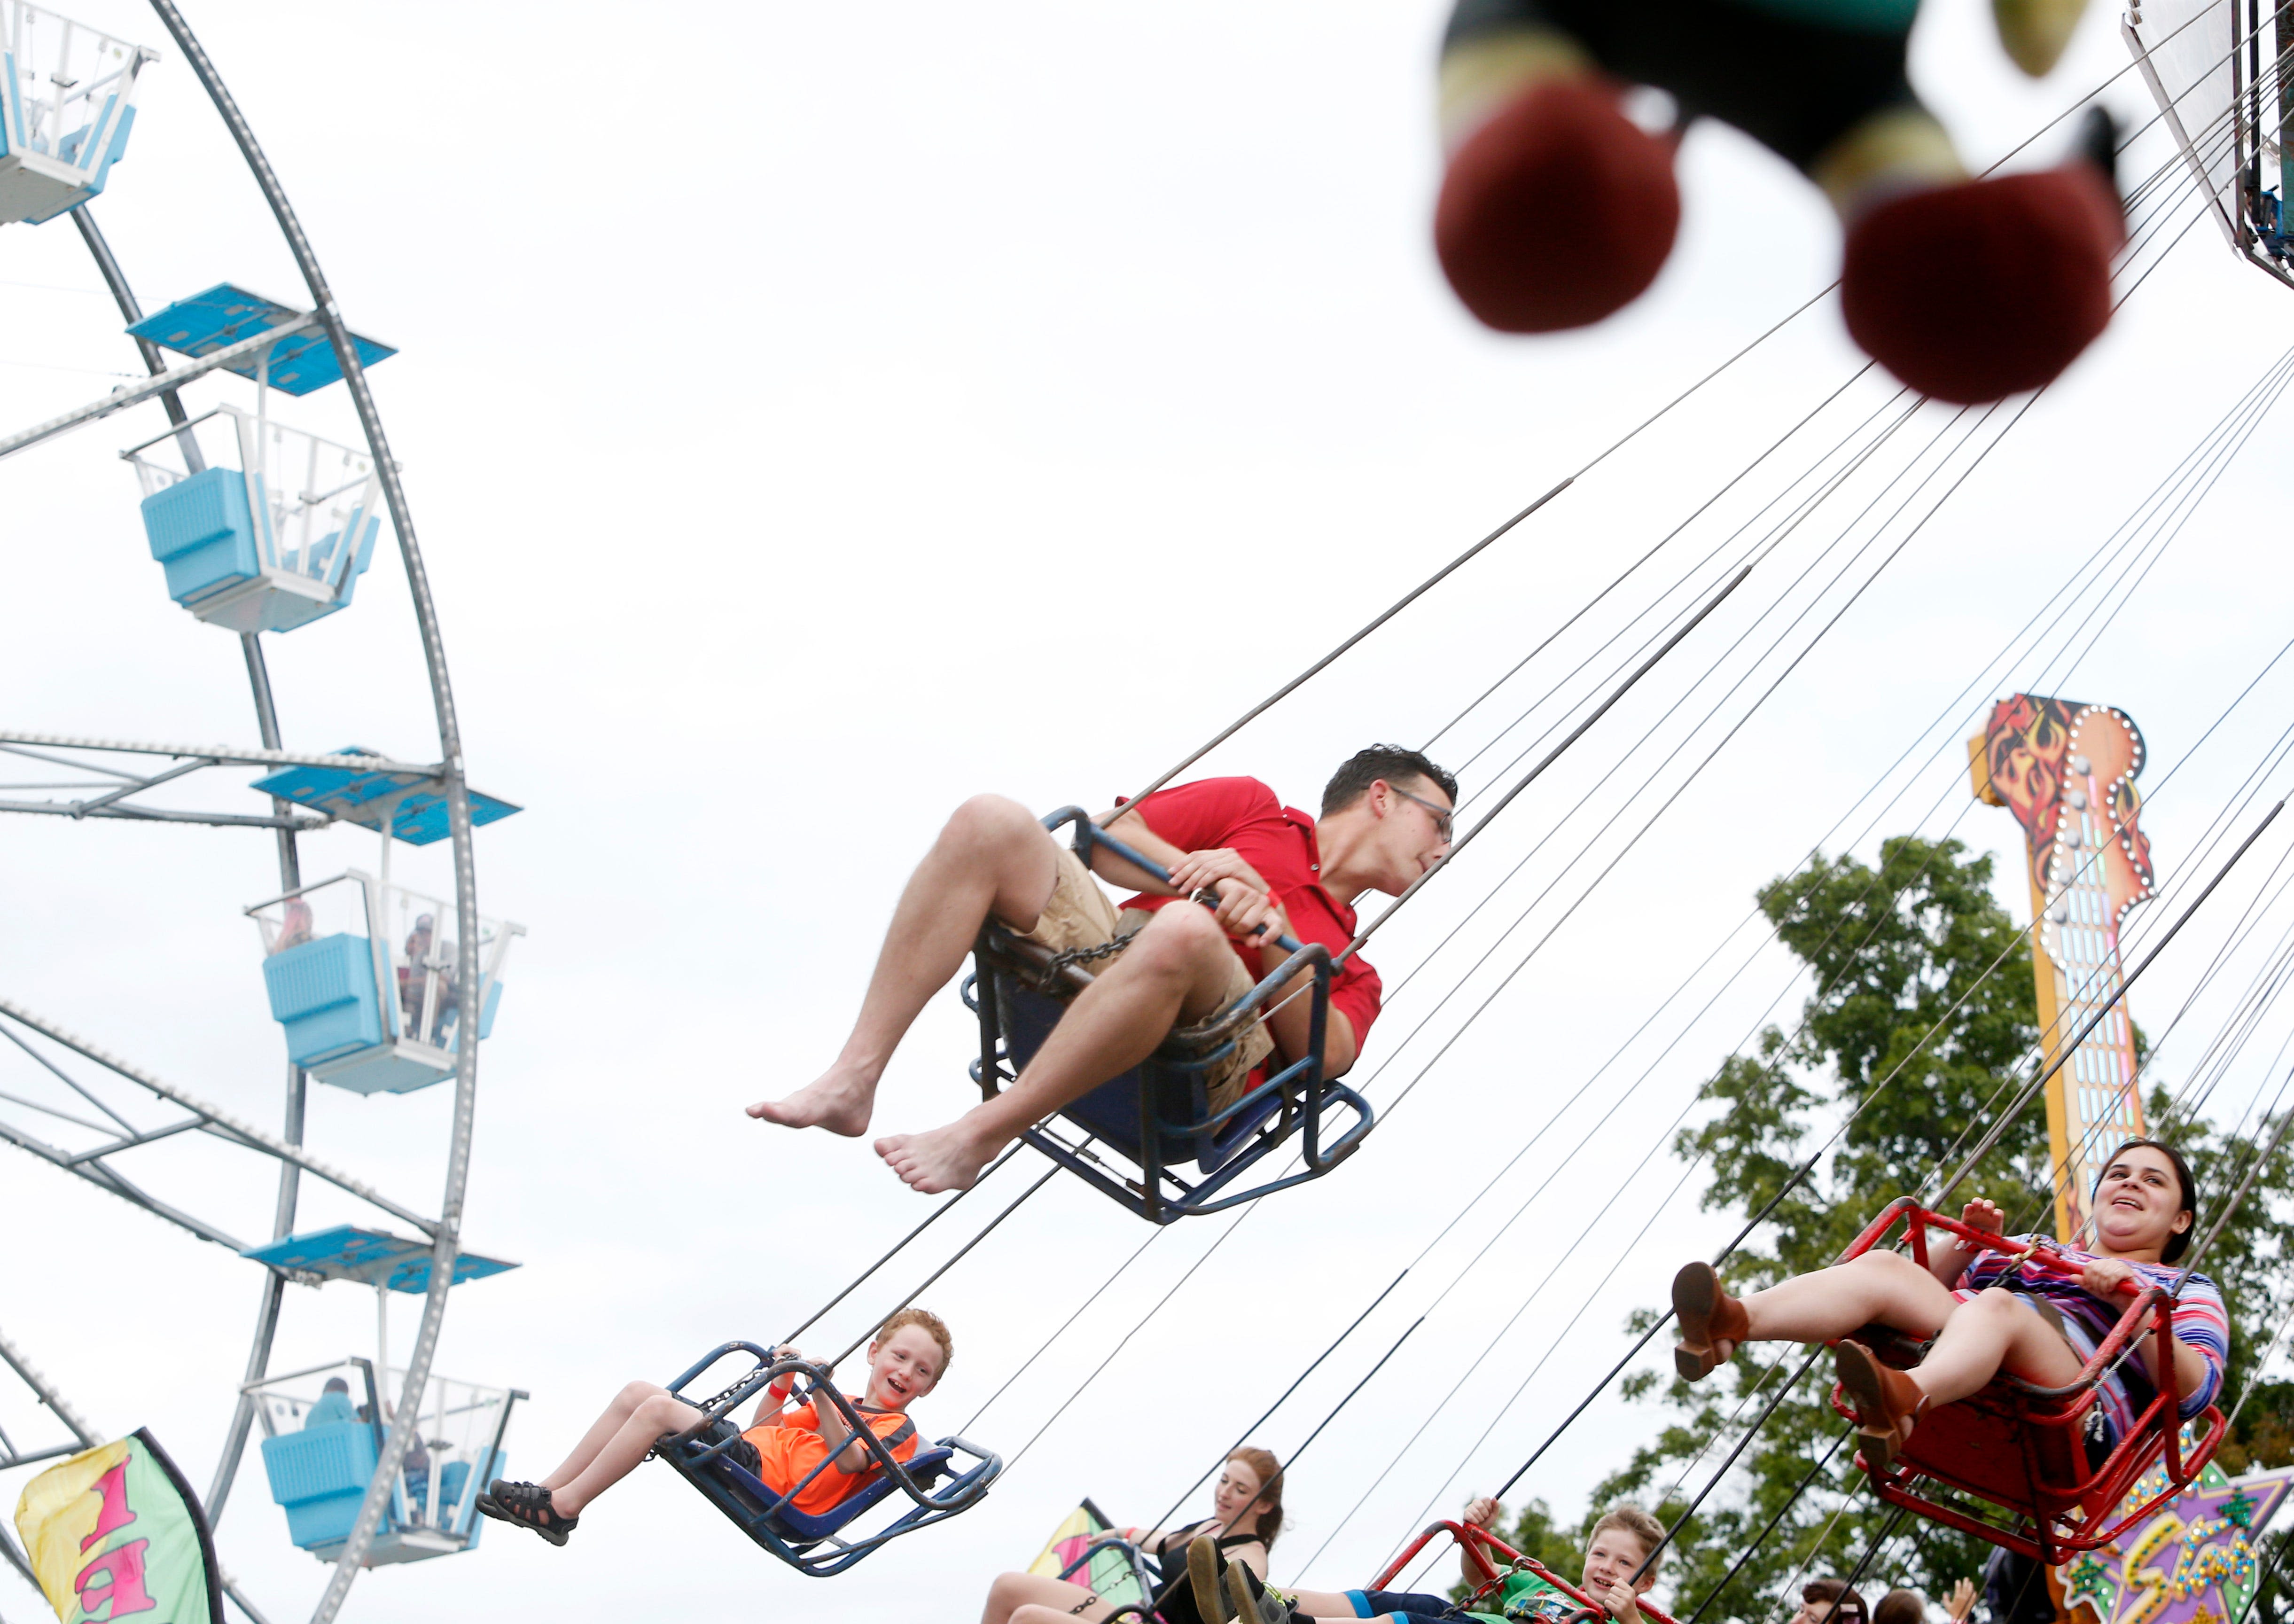 Ulster County Fair ’24 opening in New Paltz. See what's on the schedule, ticket info.